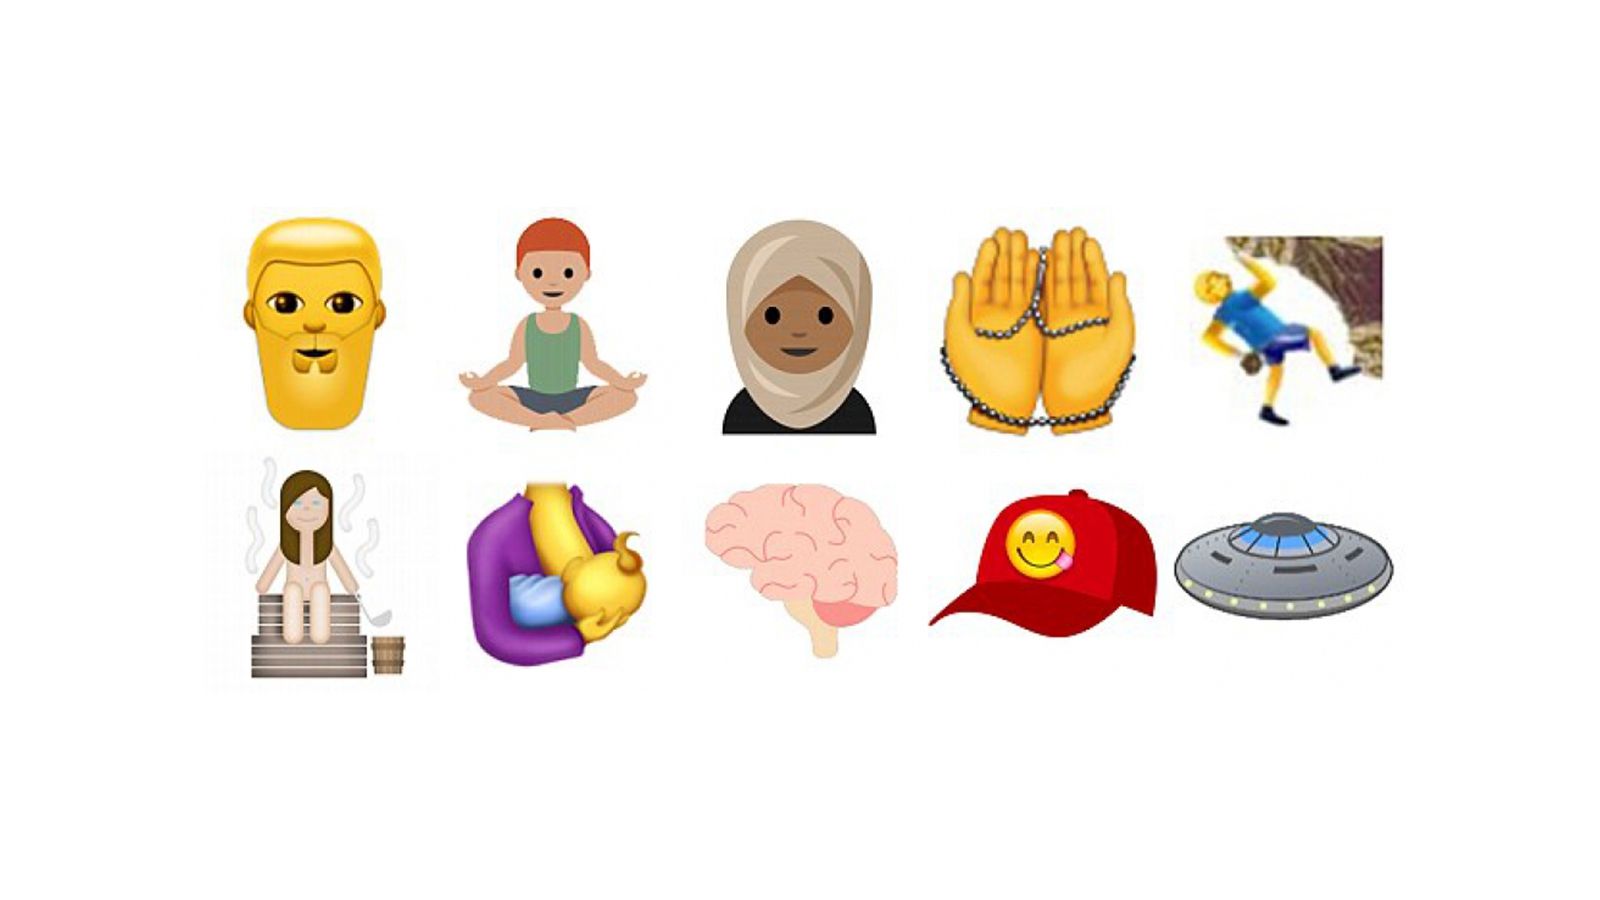 New emojis will feature a woman wearing a hijab